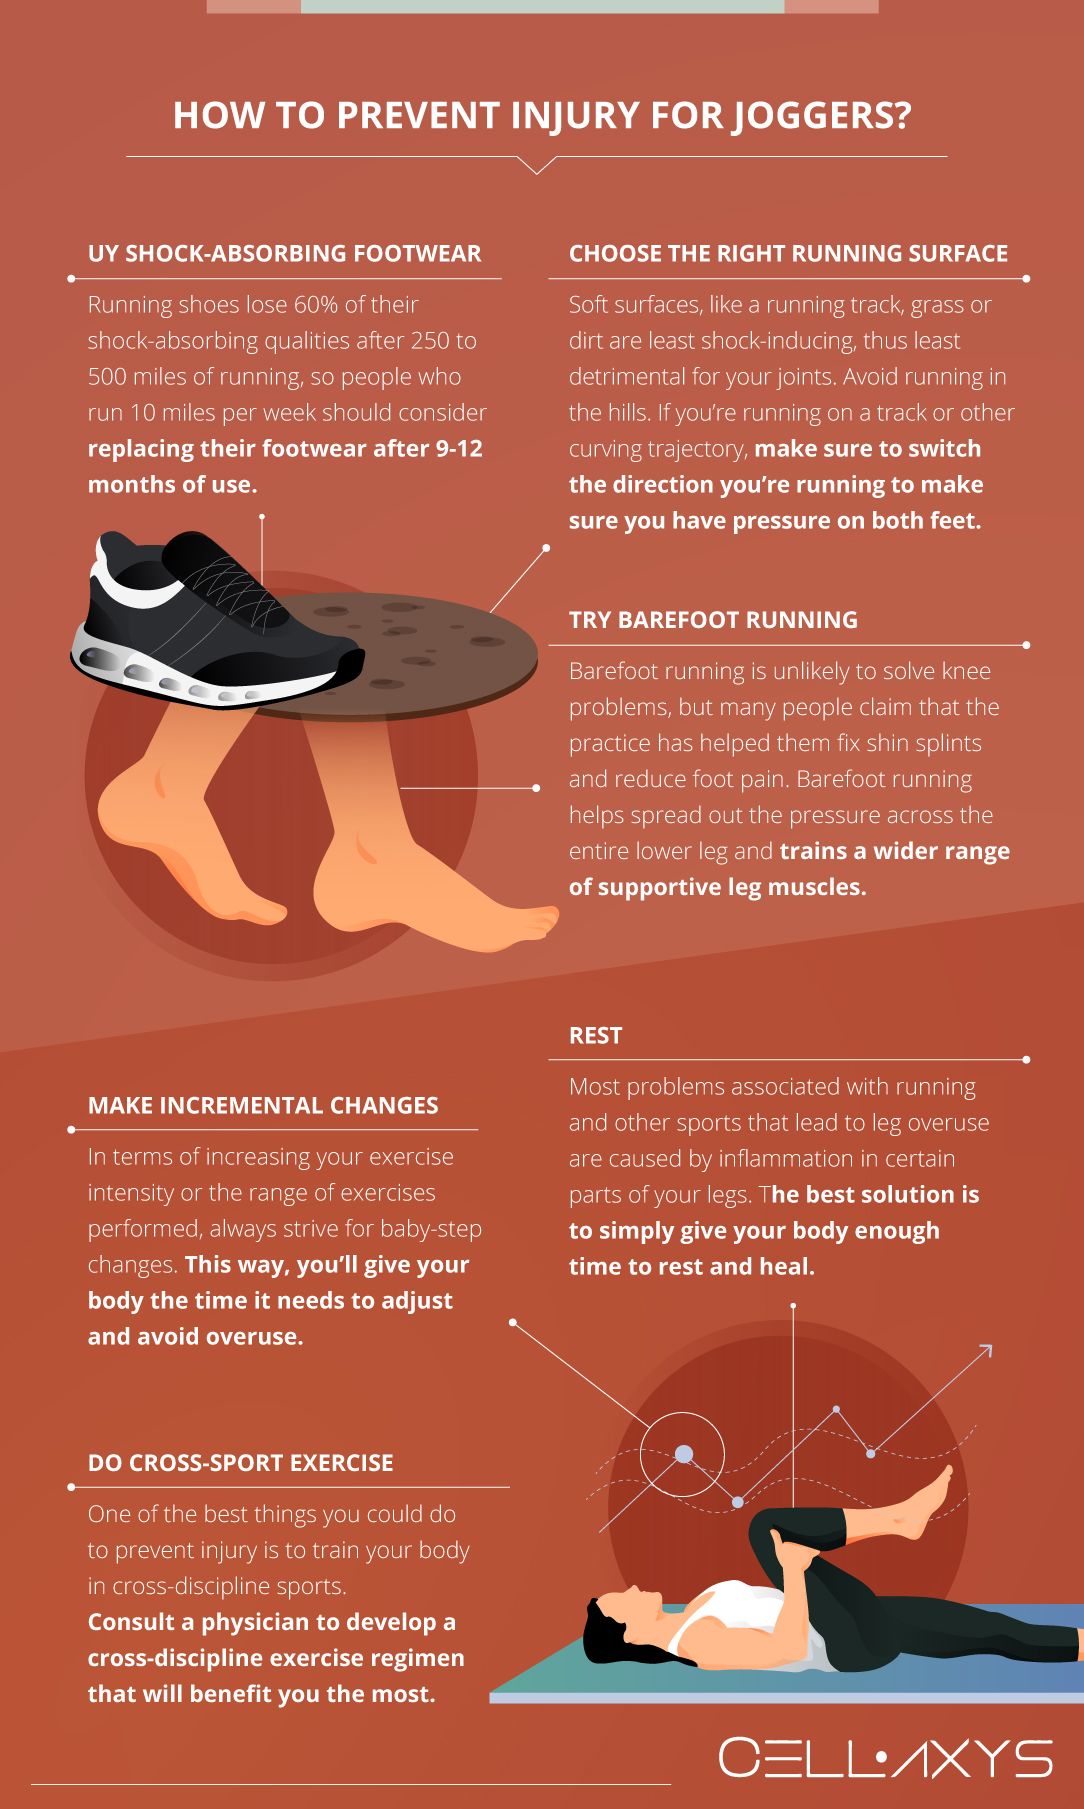 How to Prevent Injury for Joggers